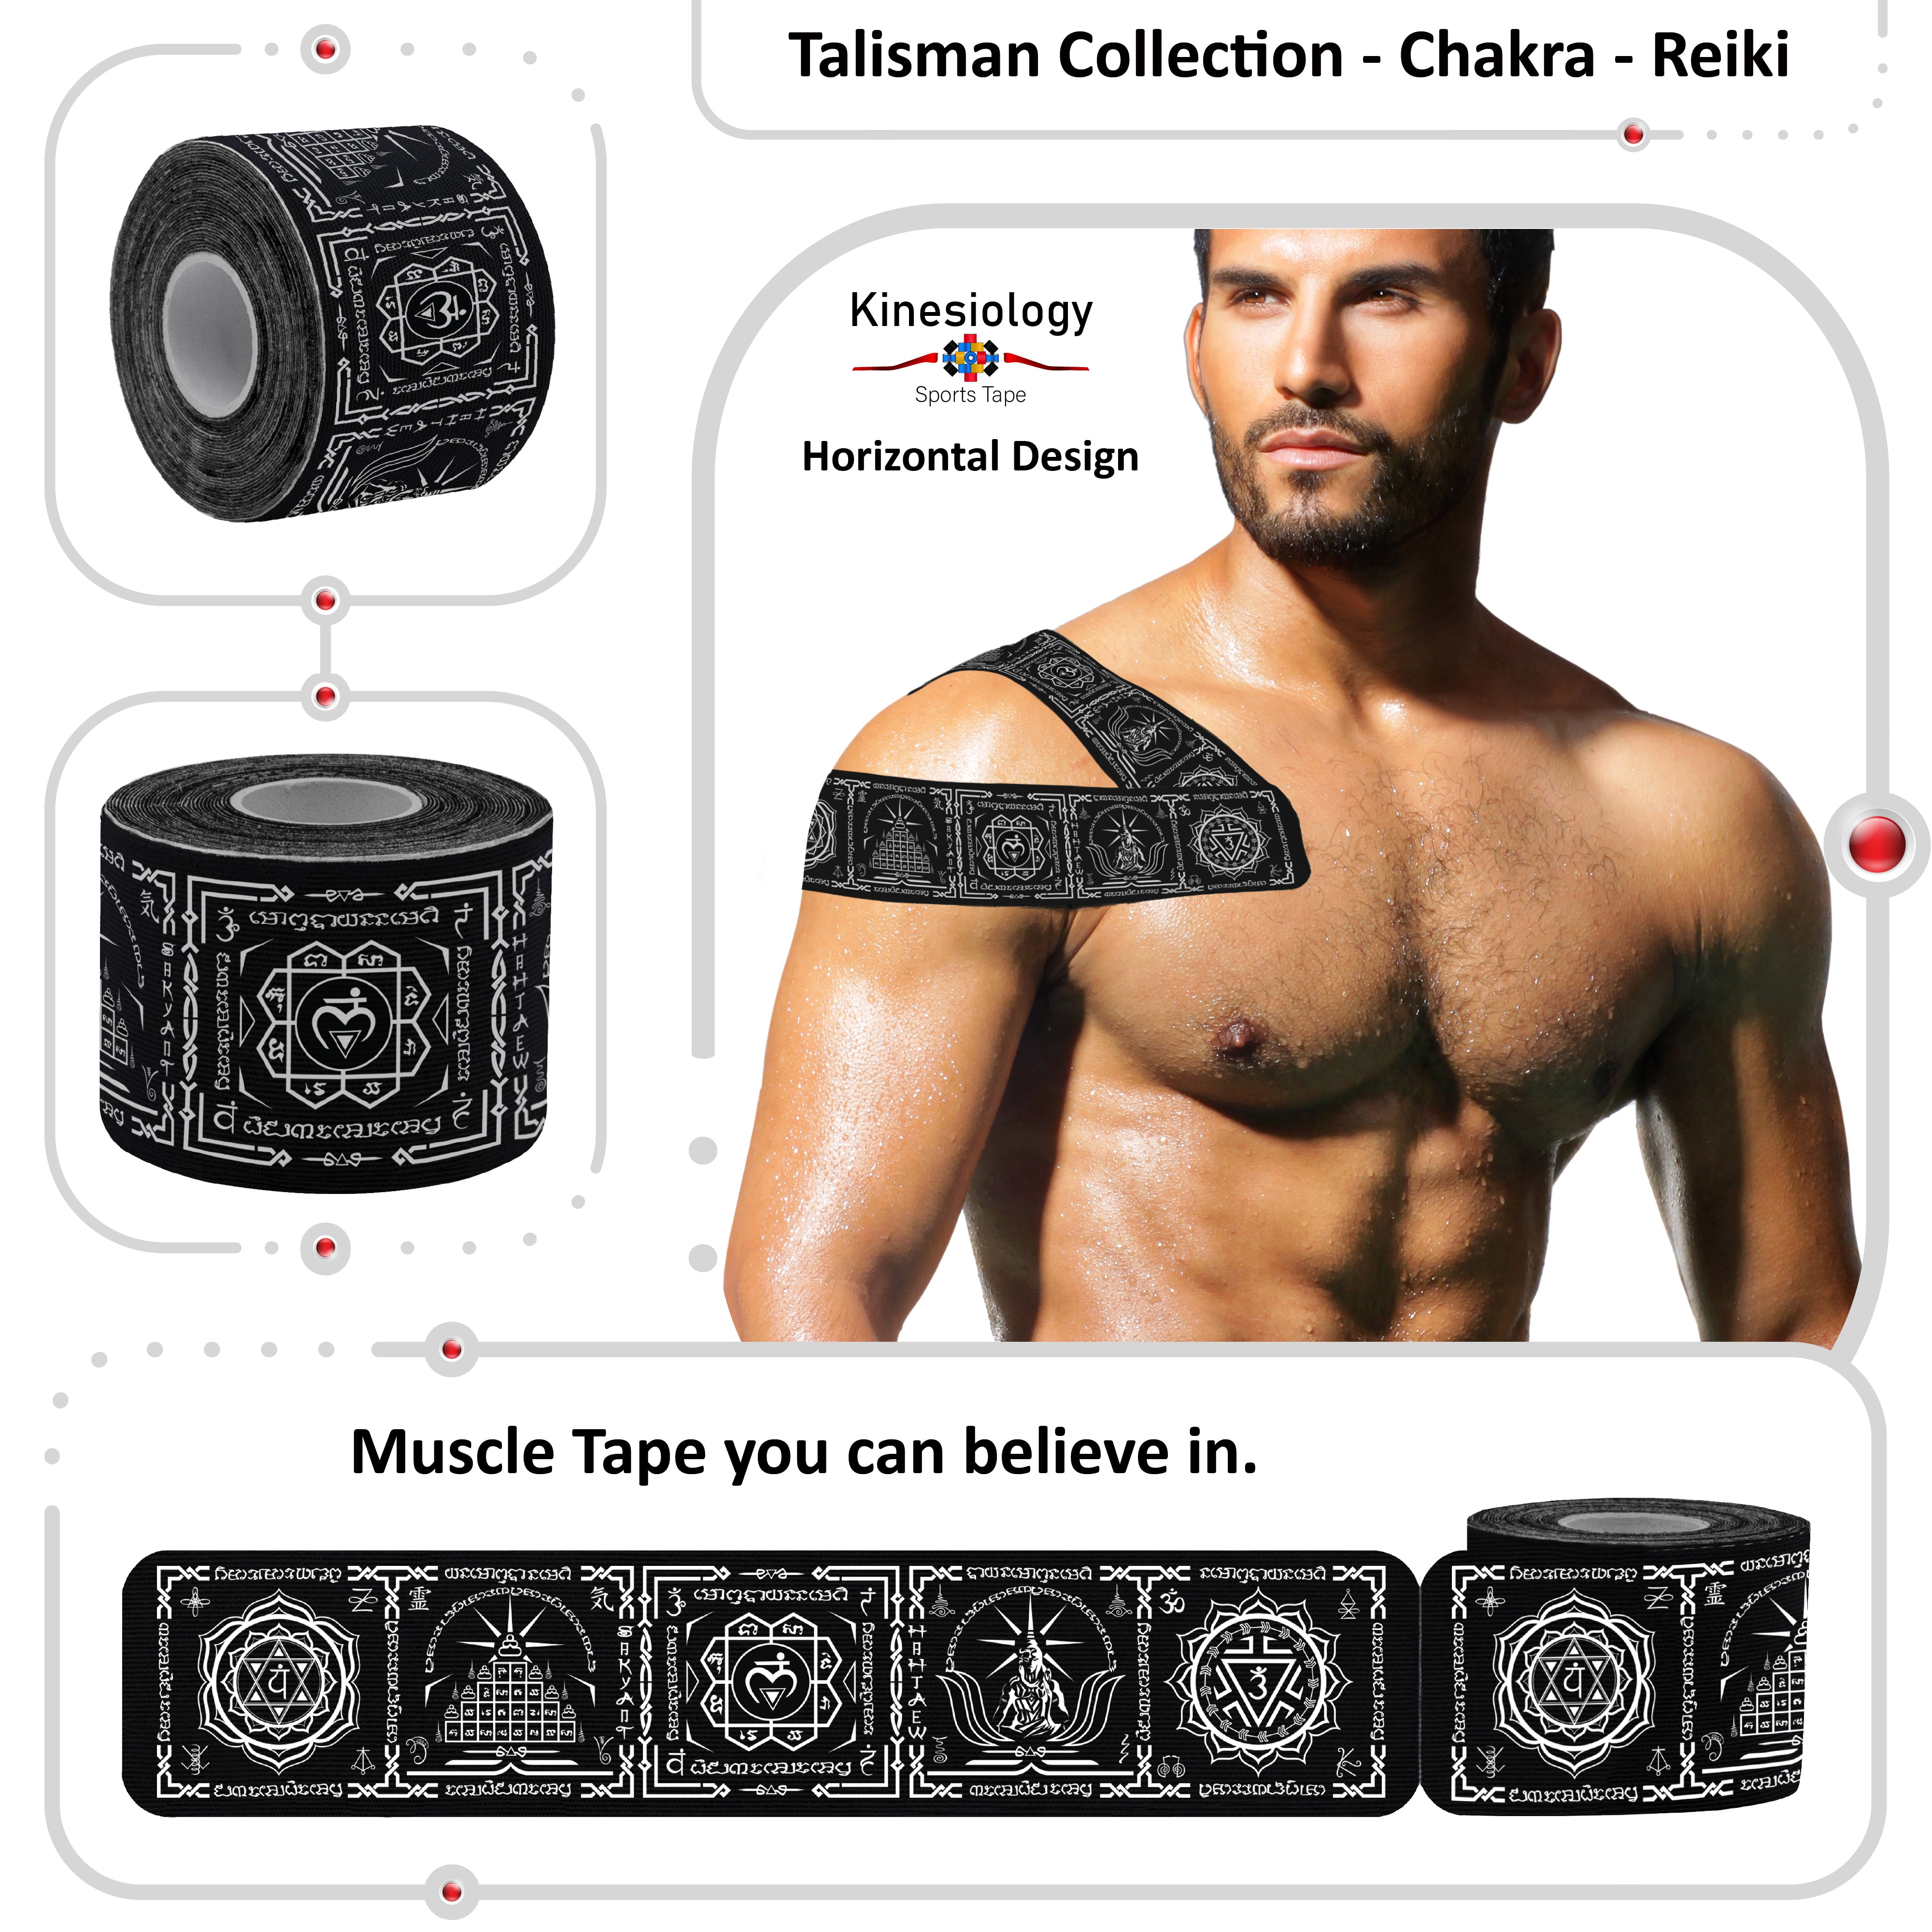 Black Kinesiology Tape Pre Cut with Dispenser - Talisman - Chakra - Horizontal Design - Athletic Sports Tape - For Healing and Recovery